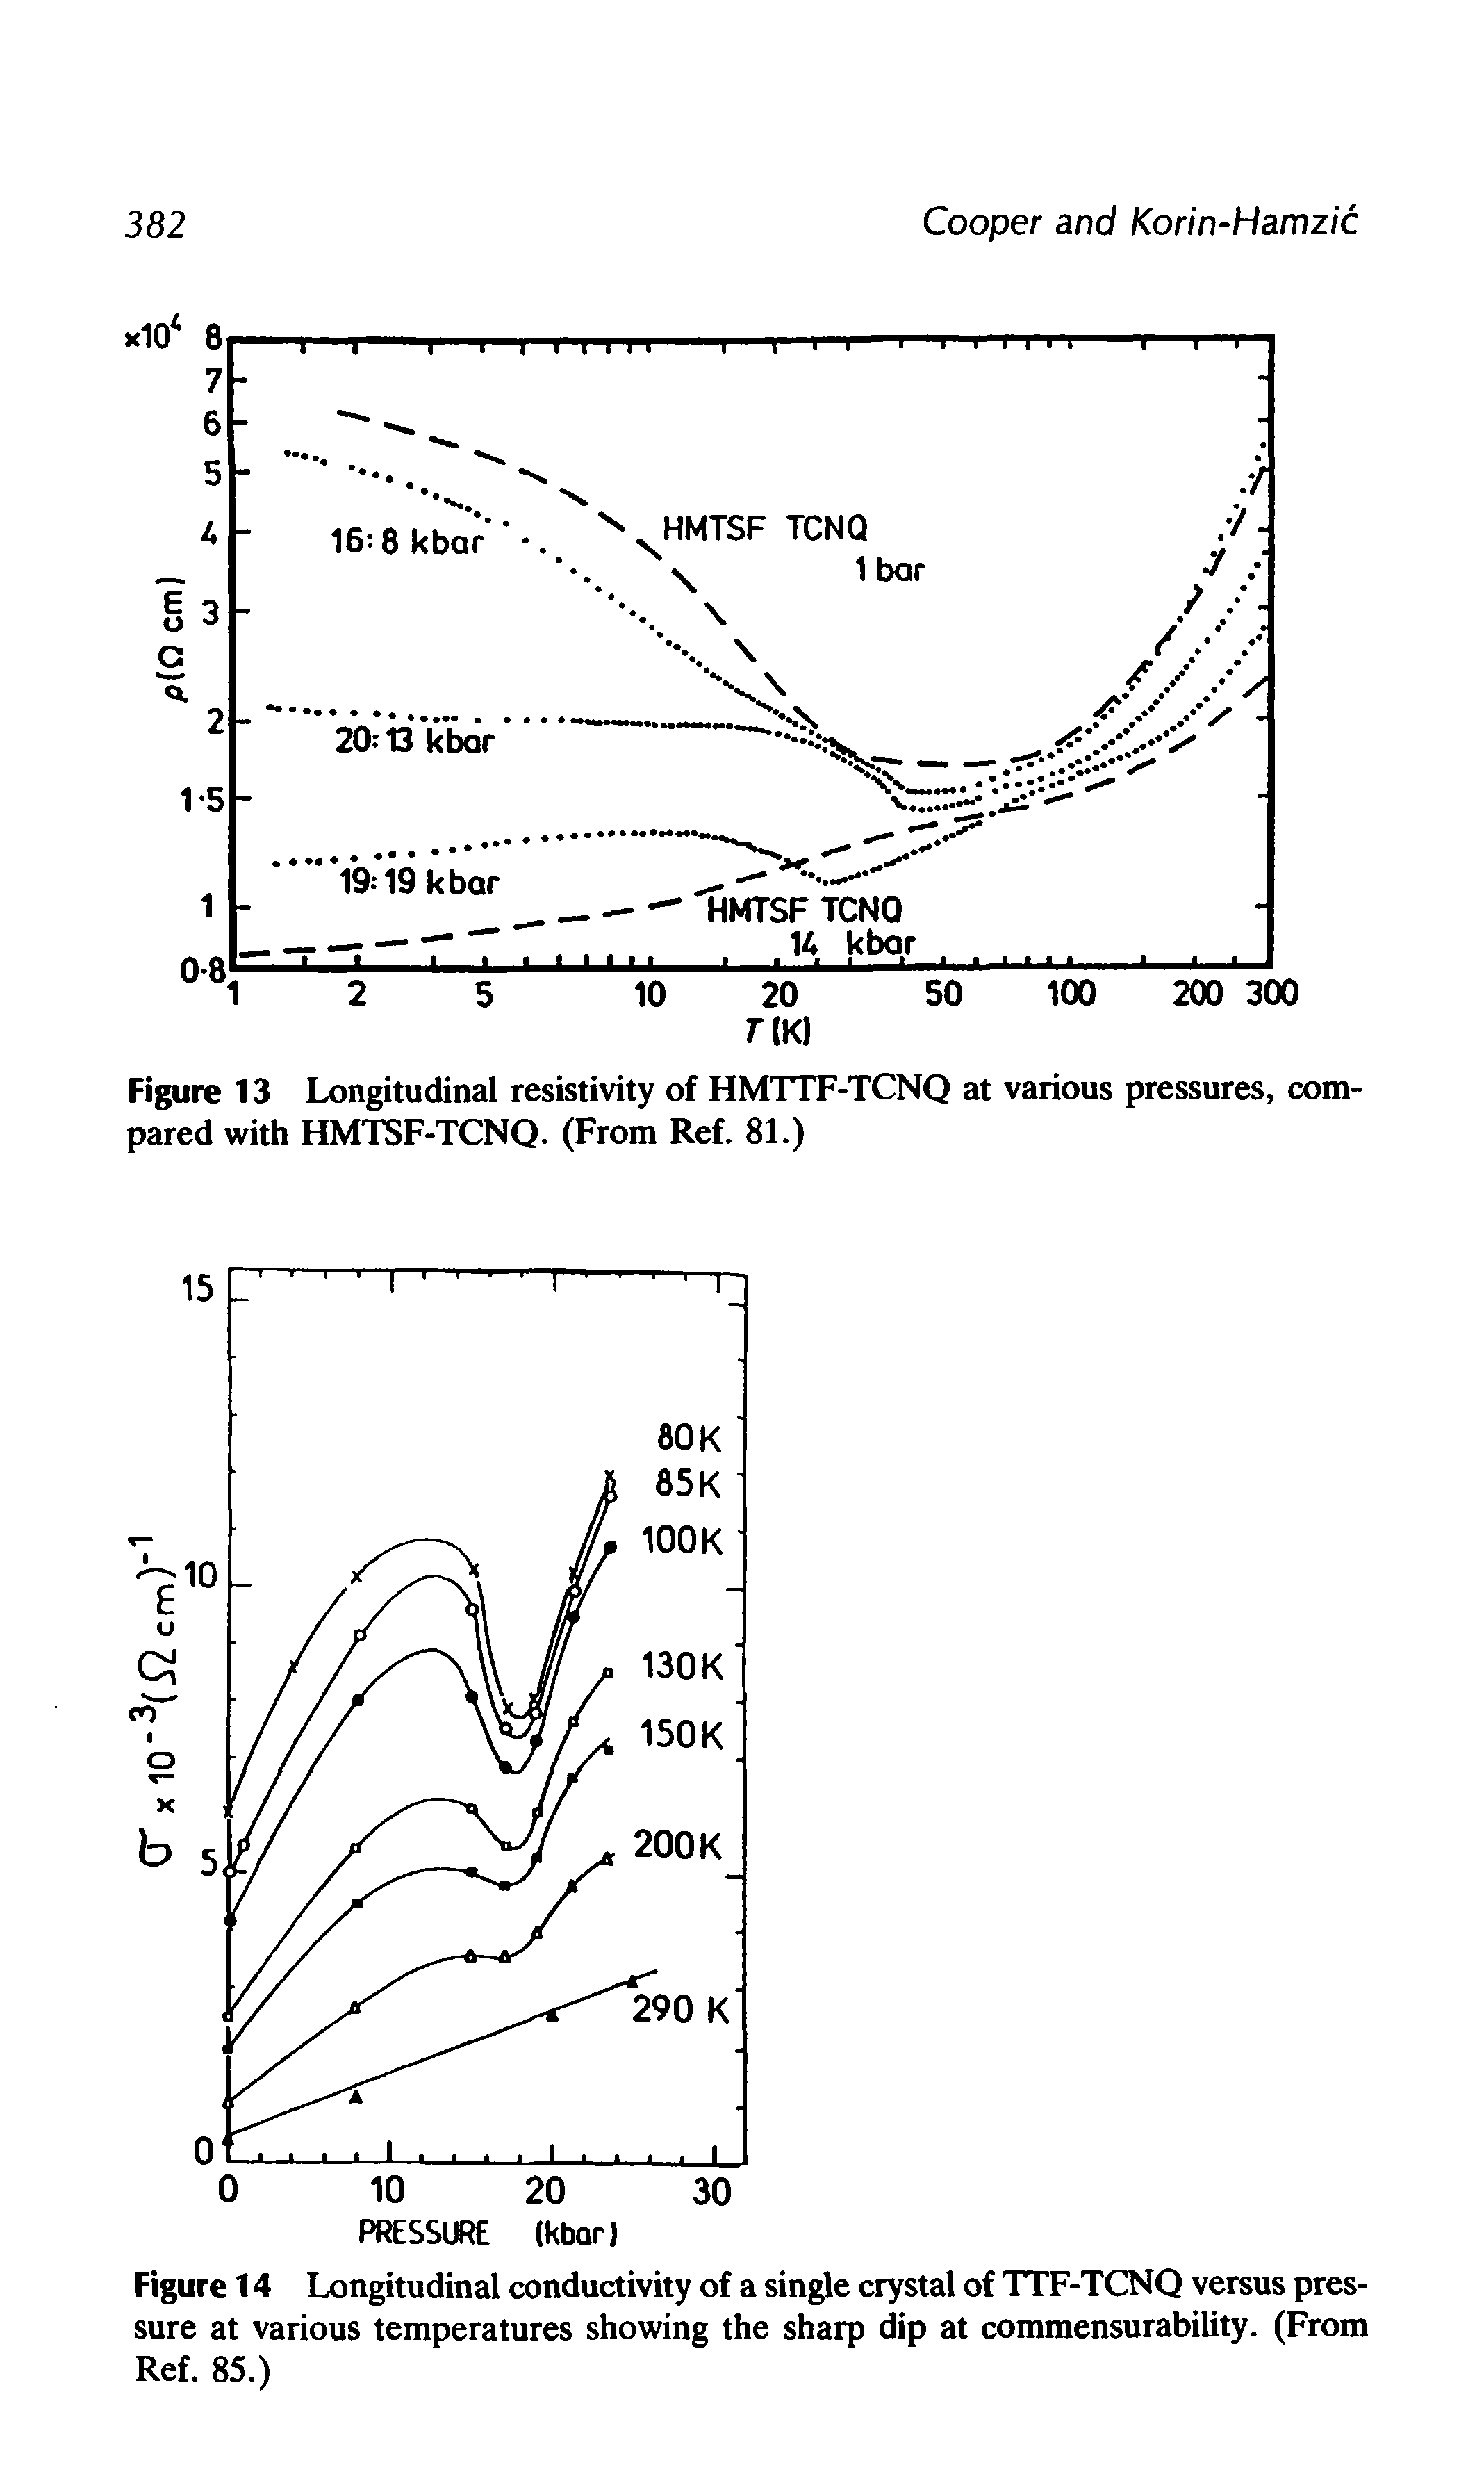 Figure 14 Longitudinal conductivity of a single crystal of TTF-TCNQ versus pressure at various temperatures showing the sharp dip at commensurability. (From Ref. 85.)...